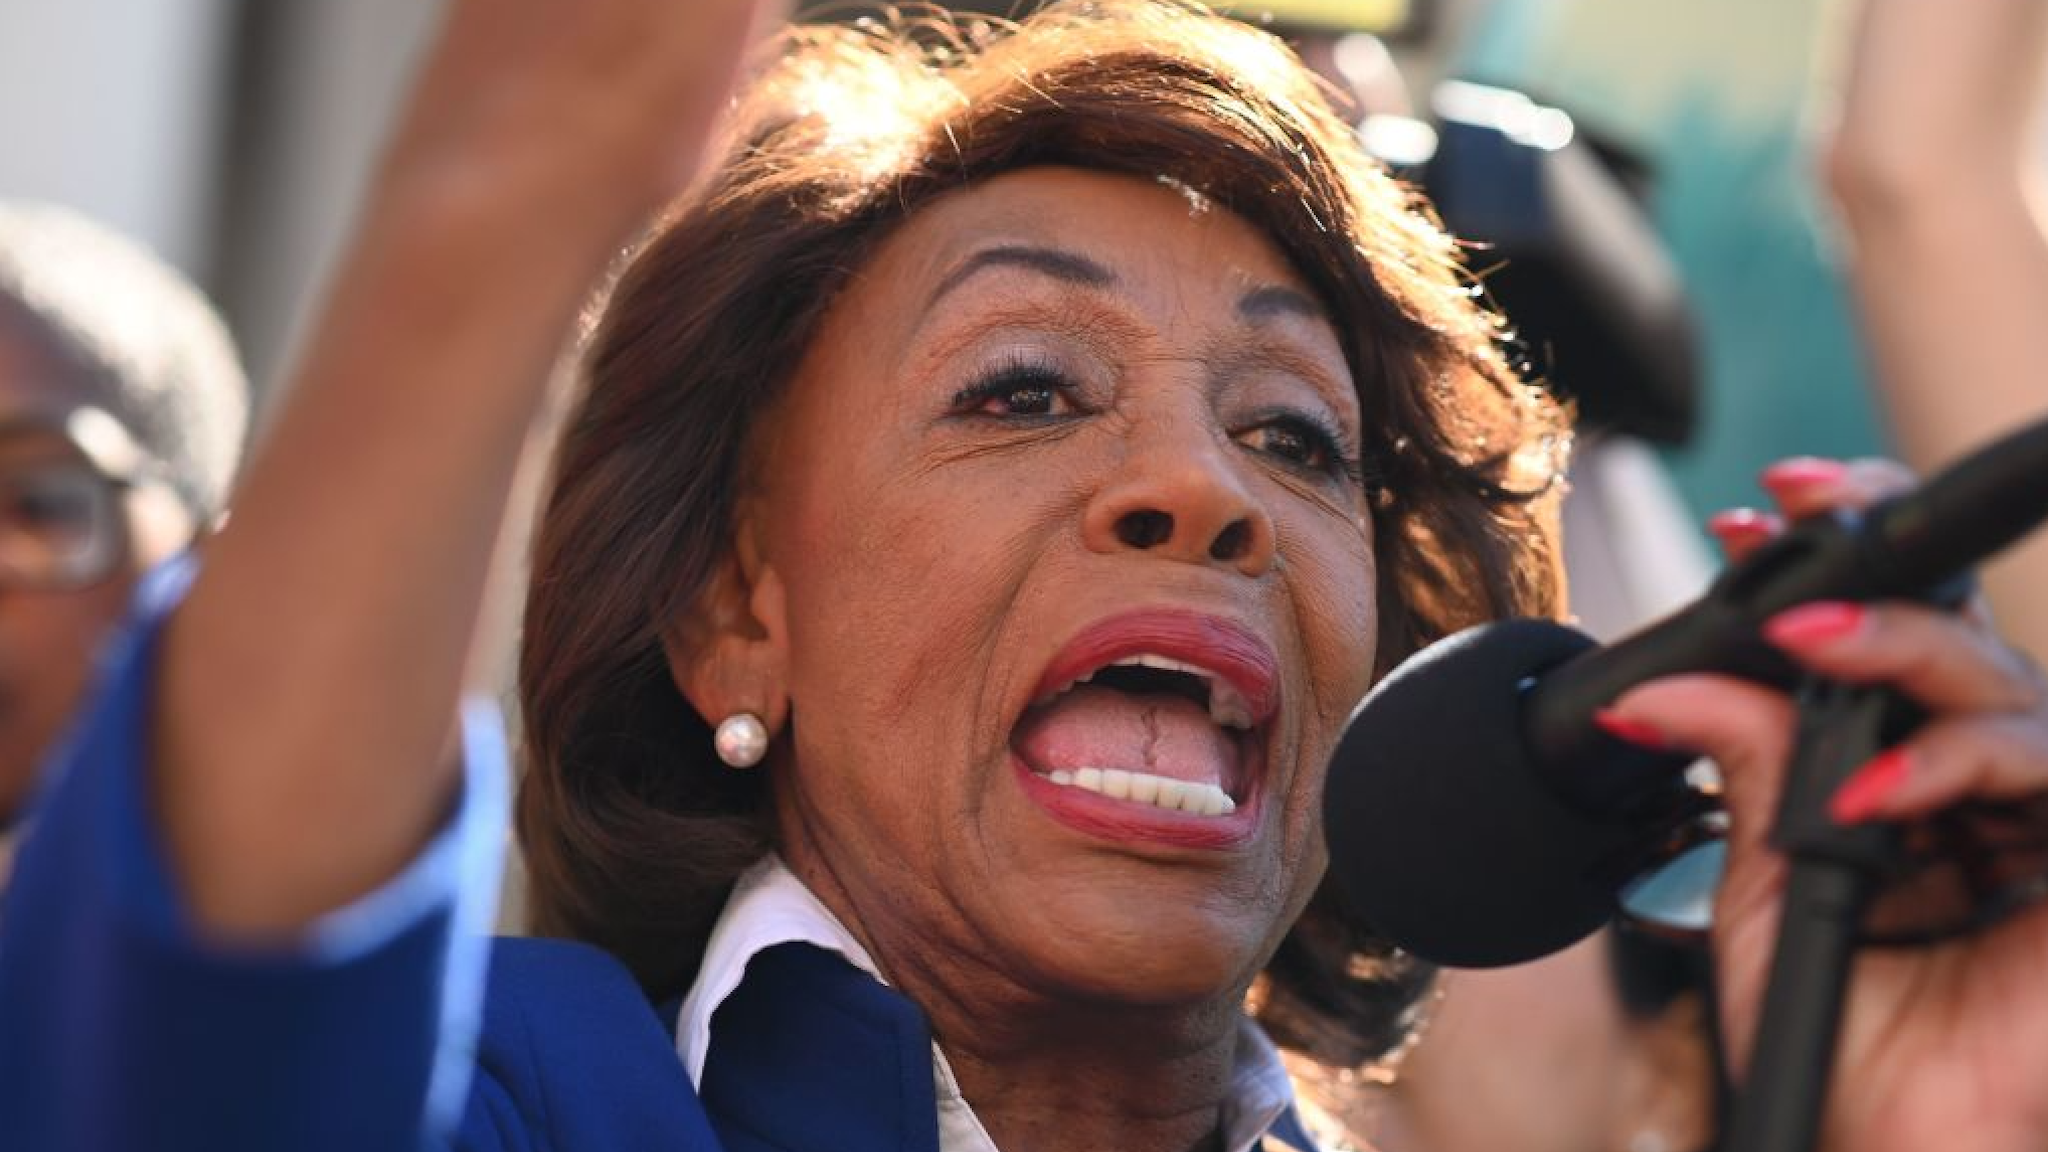 .S. Rep. Maxine Waters (D-Calif.) speaks at a protest against U.S. President Donald Trump's National Emergency declaration, February 18, 2019, outside City Hall in Los Angeles, California.